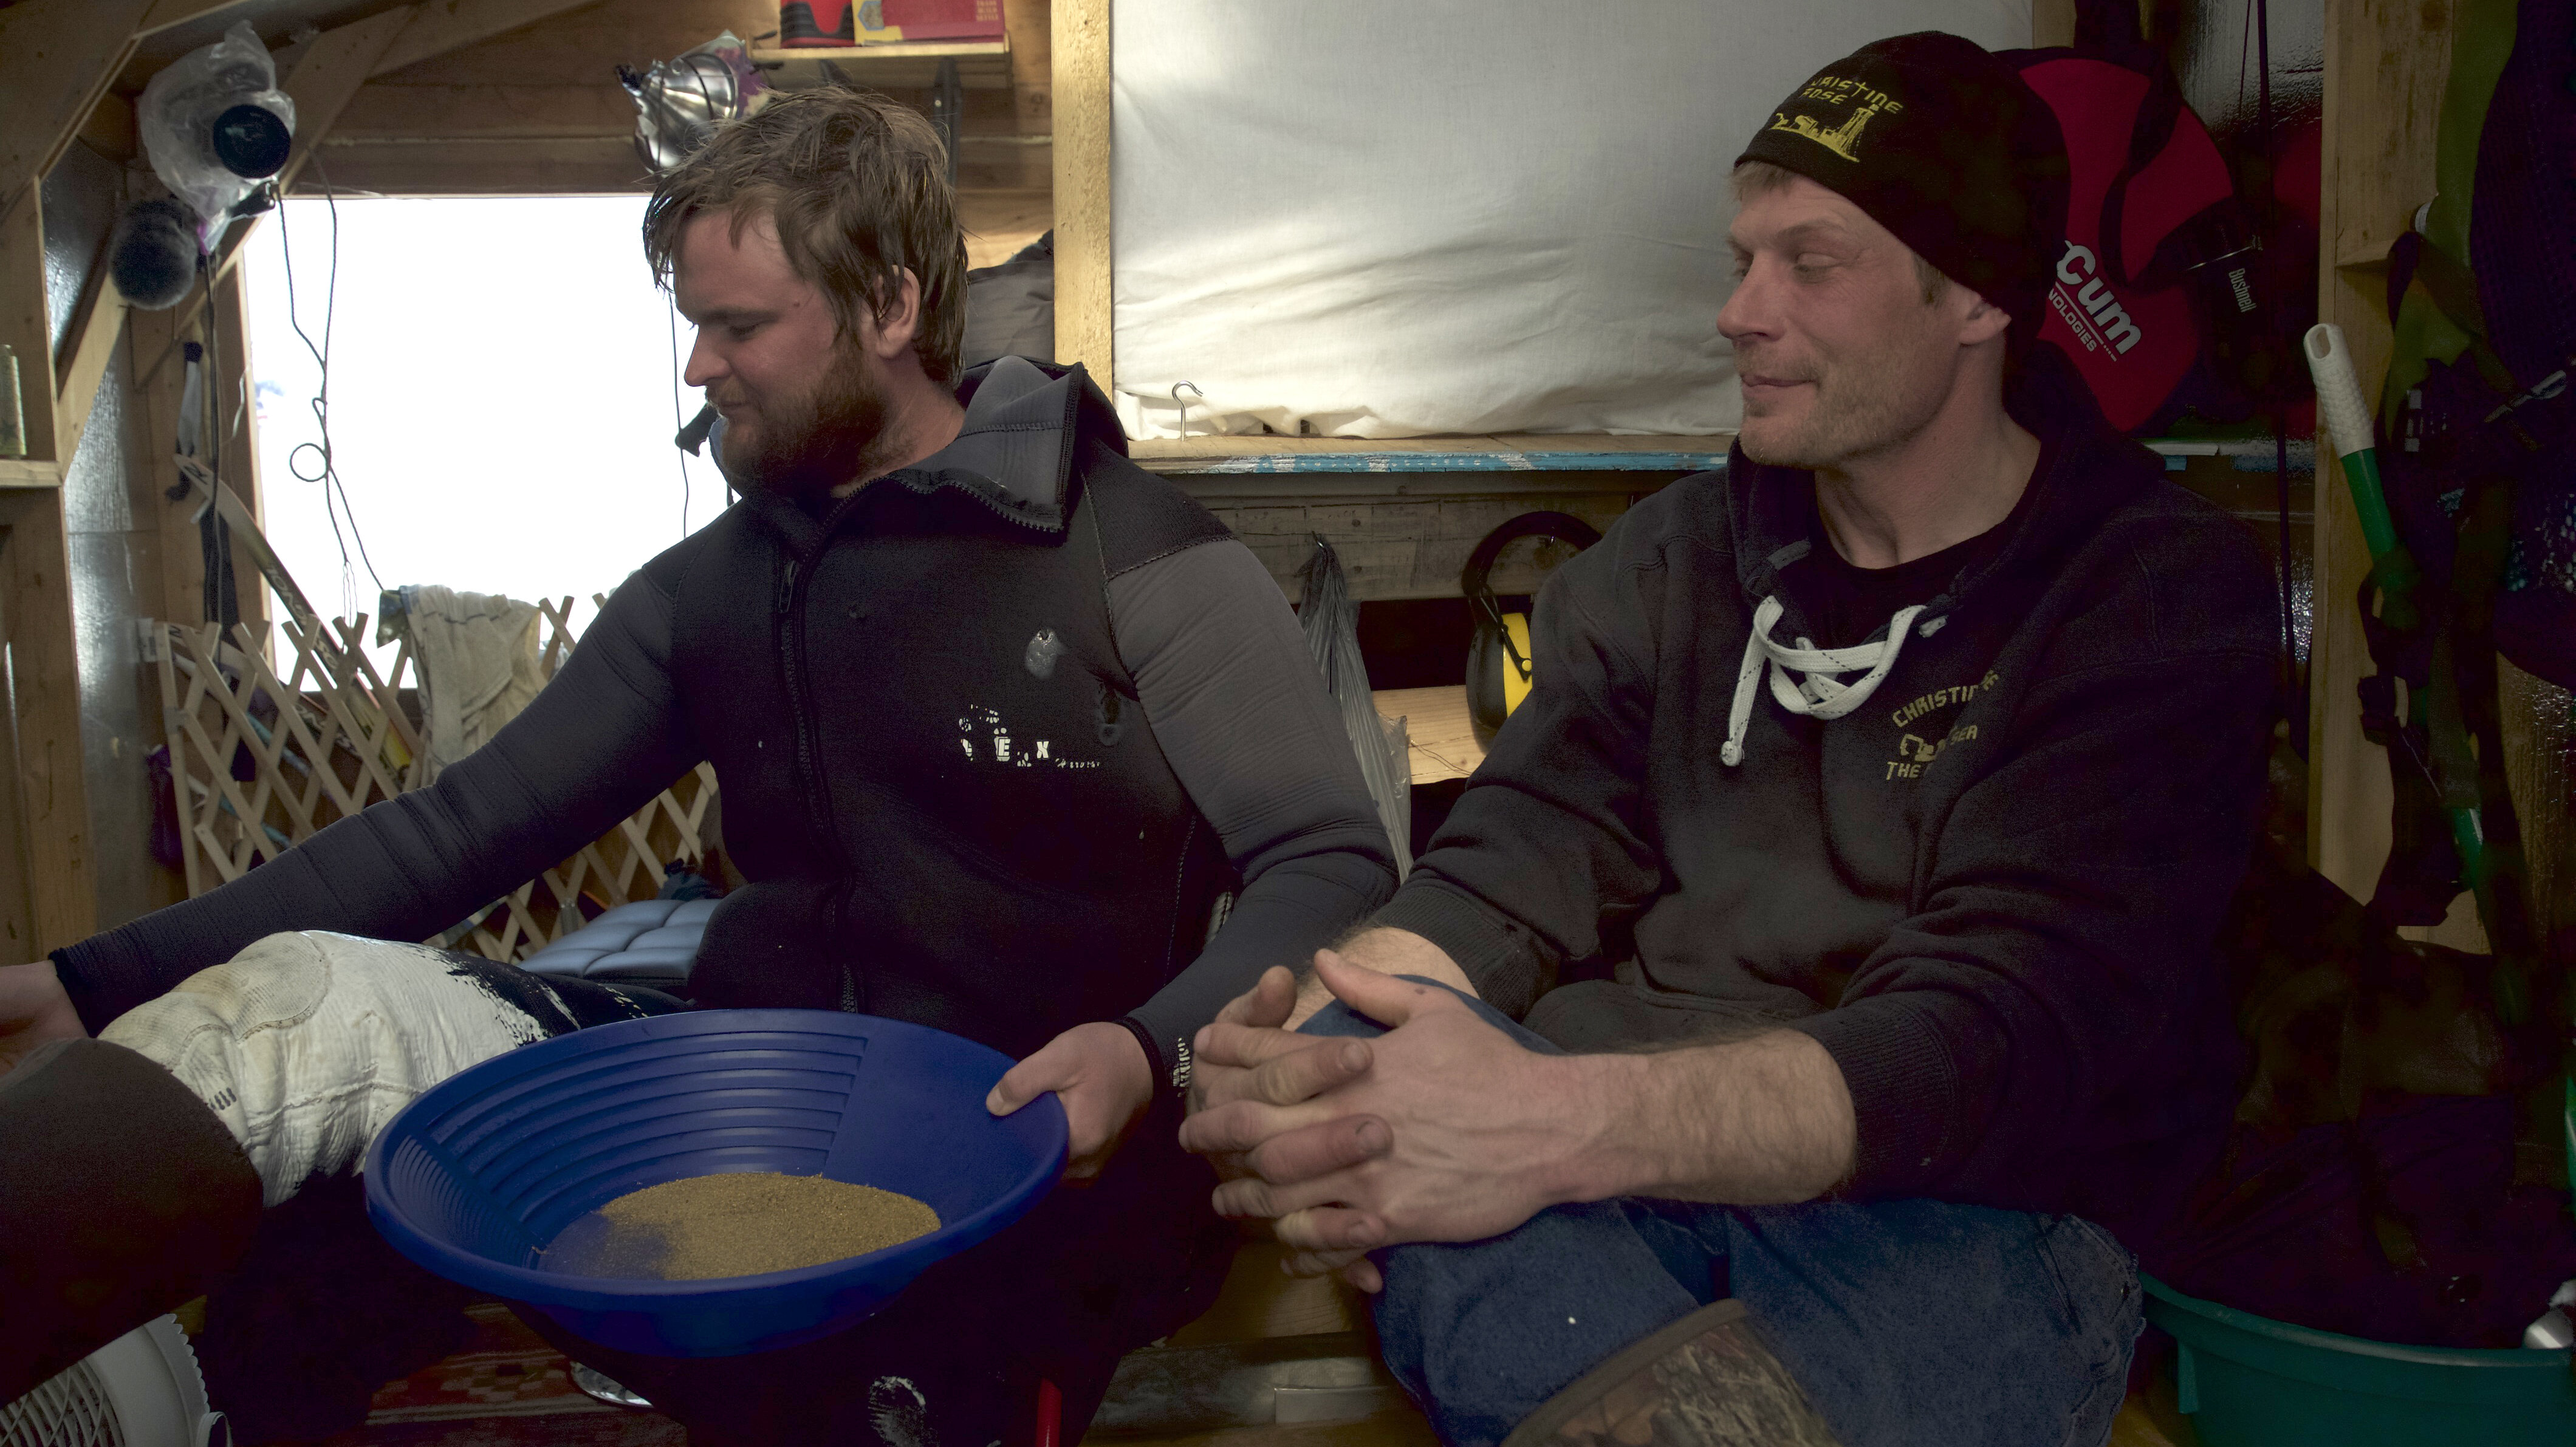 Bering Sea Gold S7E6 Lady Luck